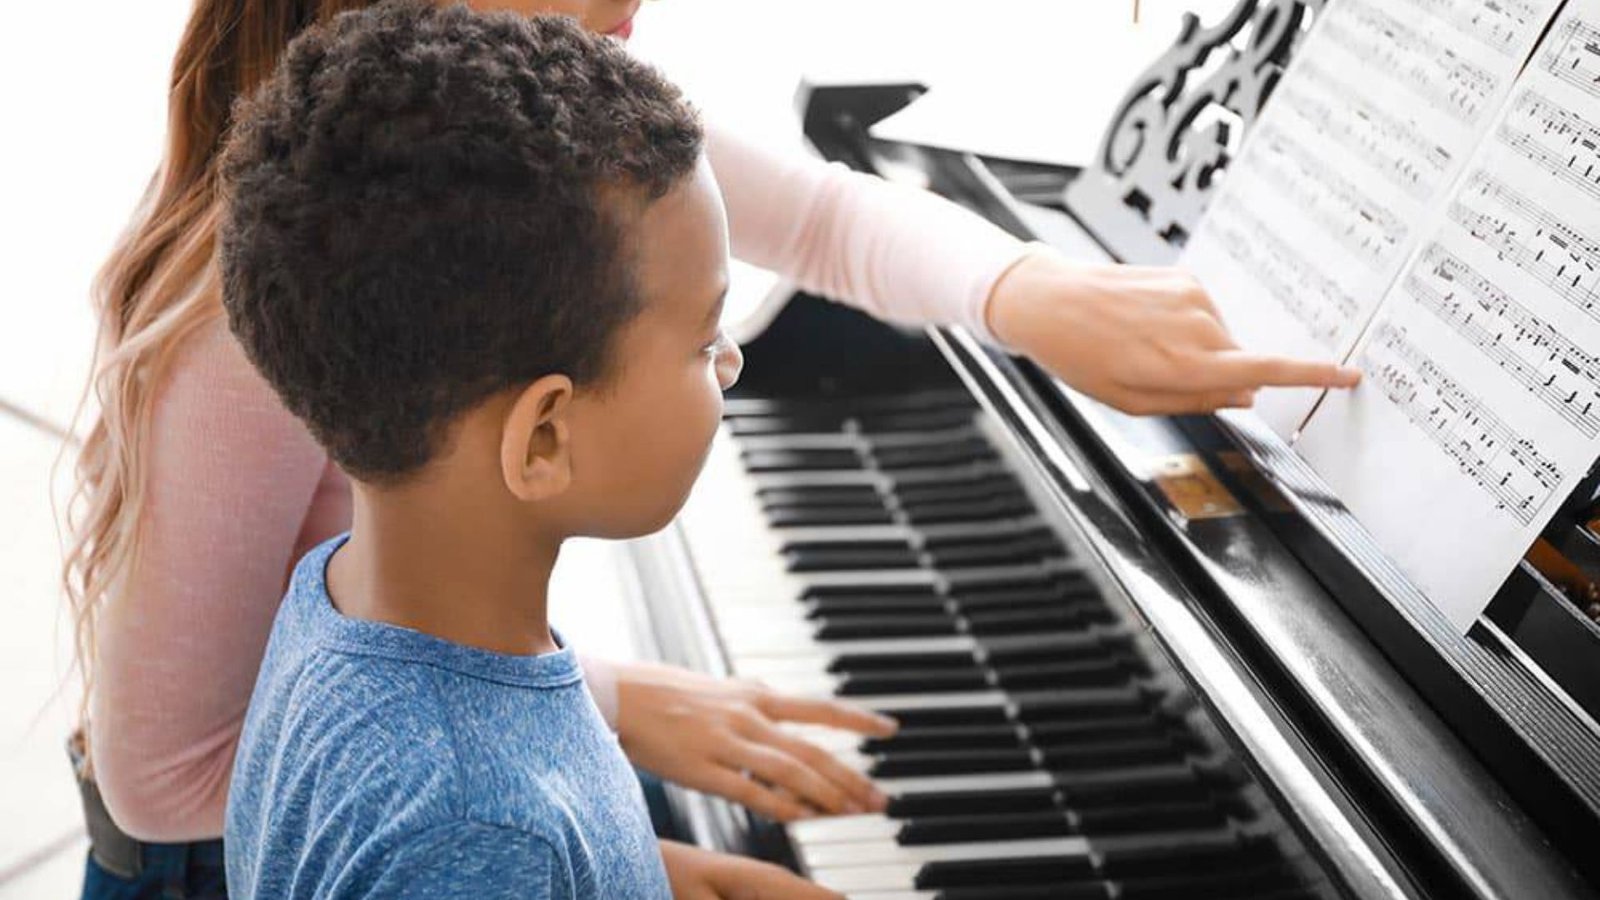 a lady teaching a kid how to play a keyboard showing musical styles 